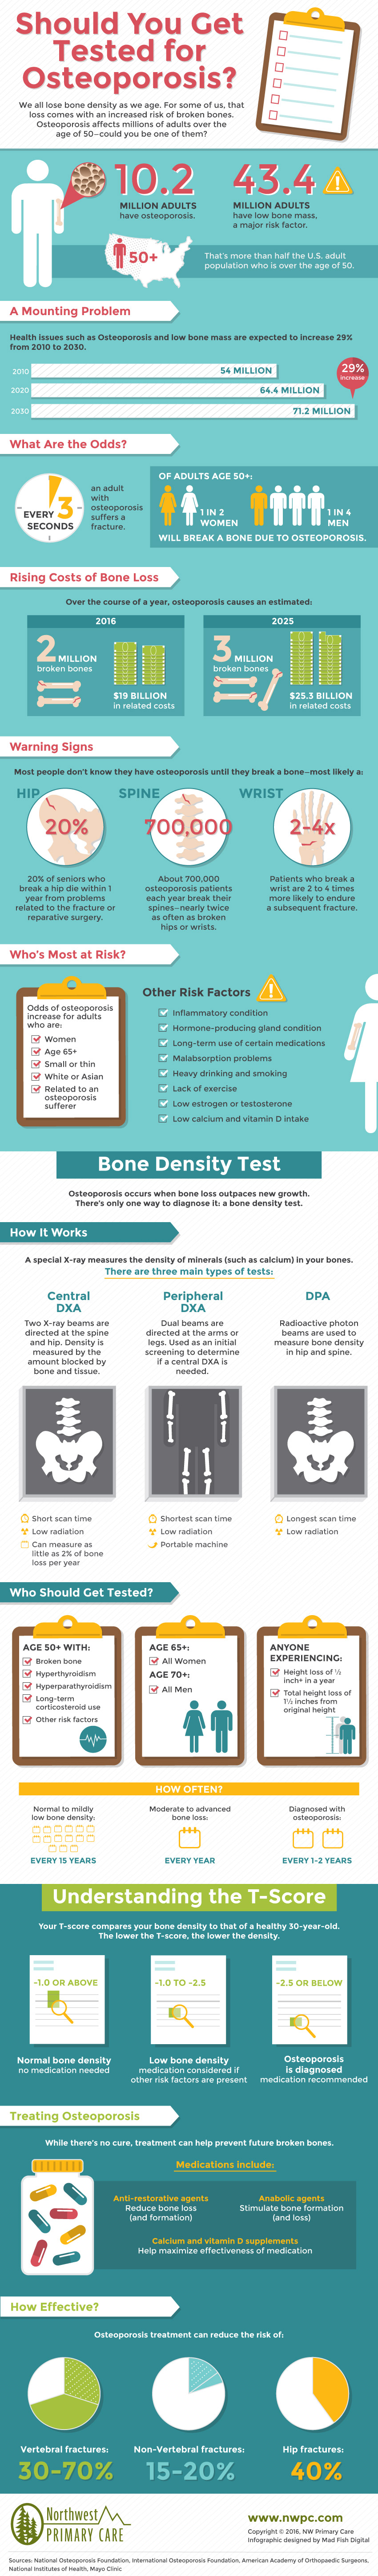 Should You Get Tested for Osteoporosis? 